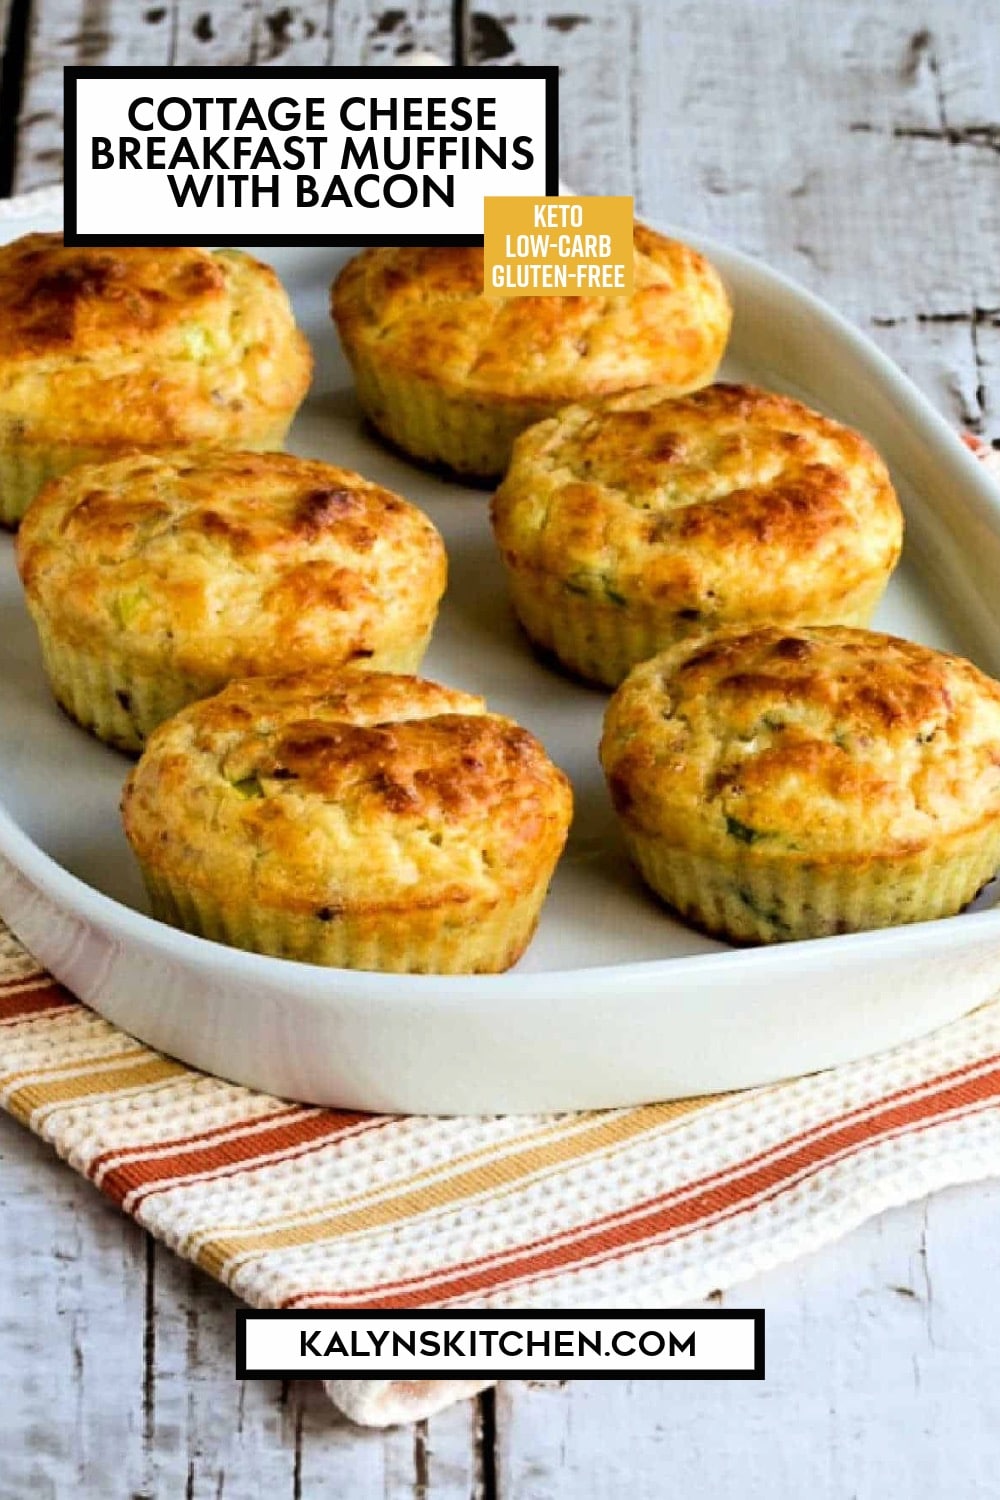 Pinterest image of Cottage Cheese Breakfast Muffins with Bacon